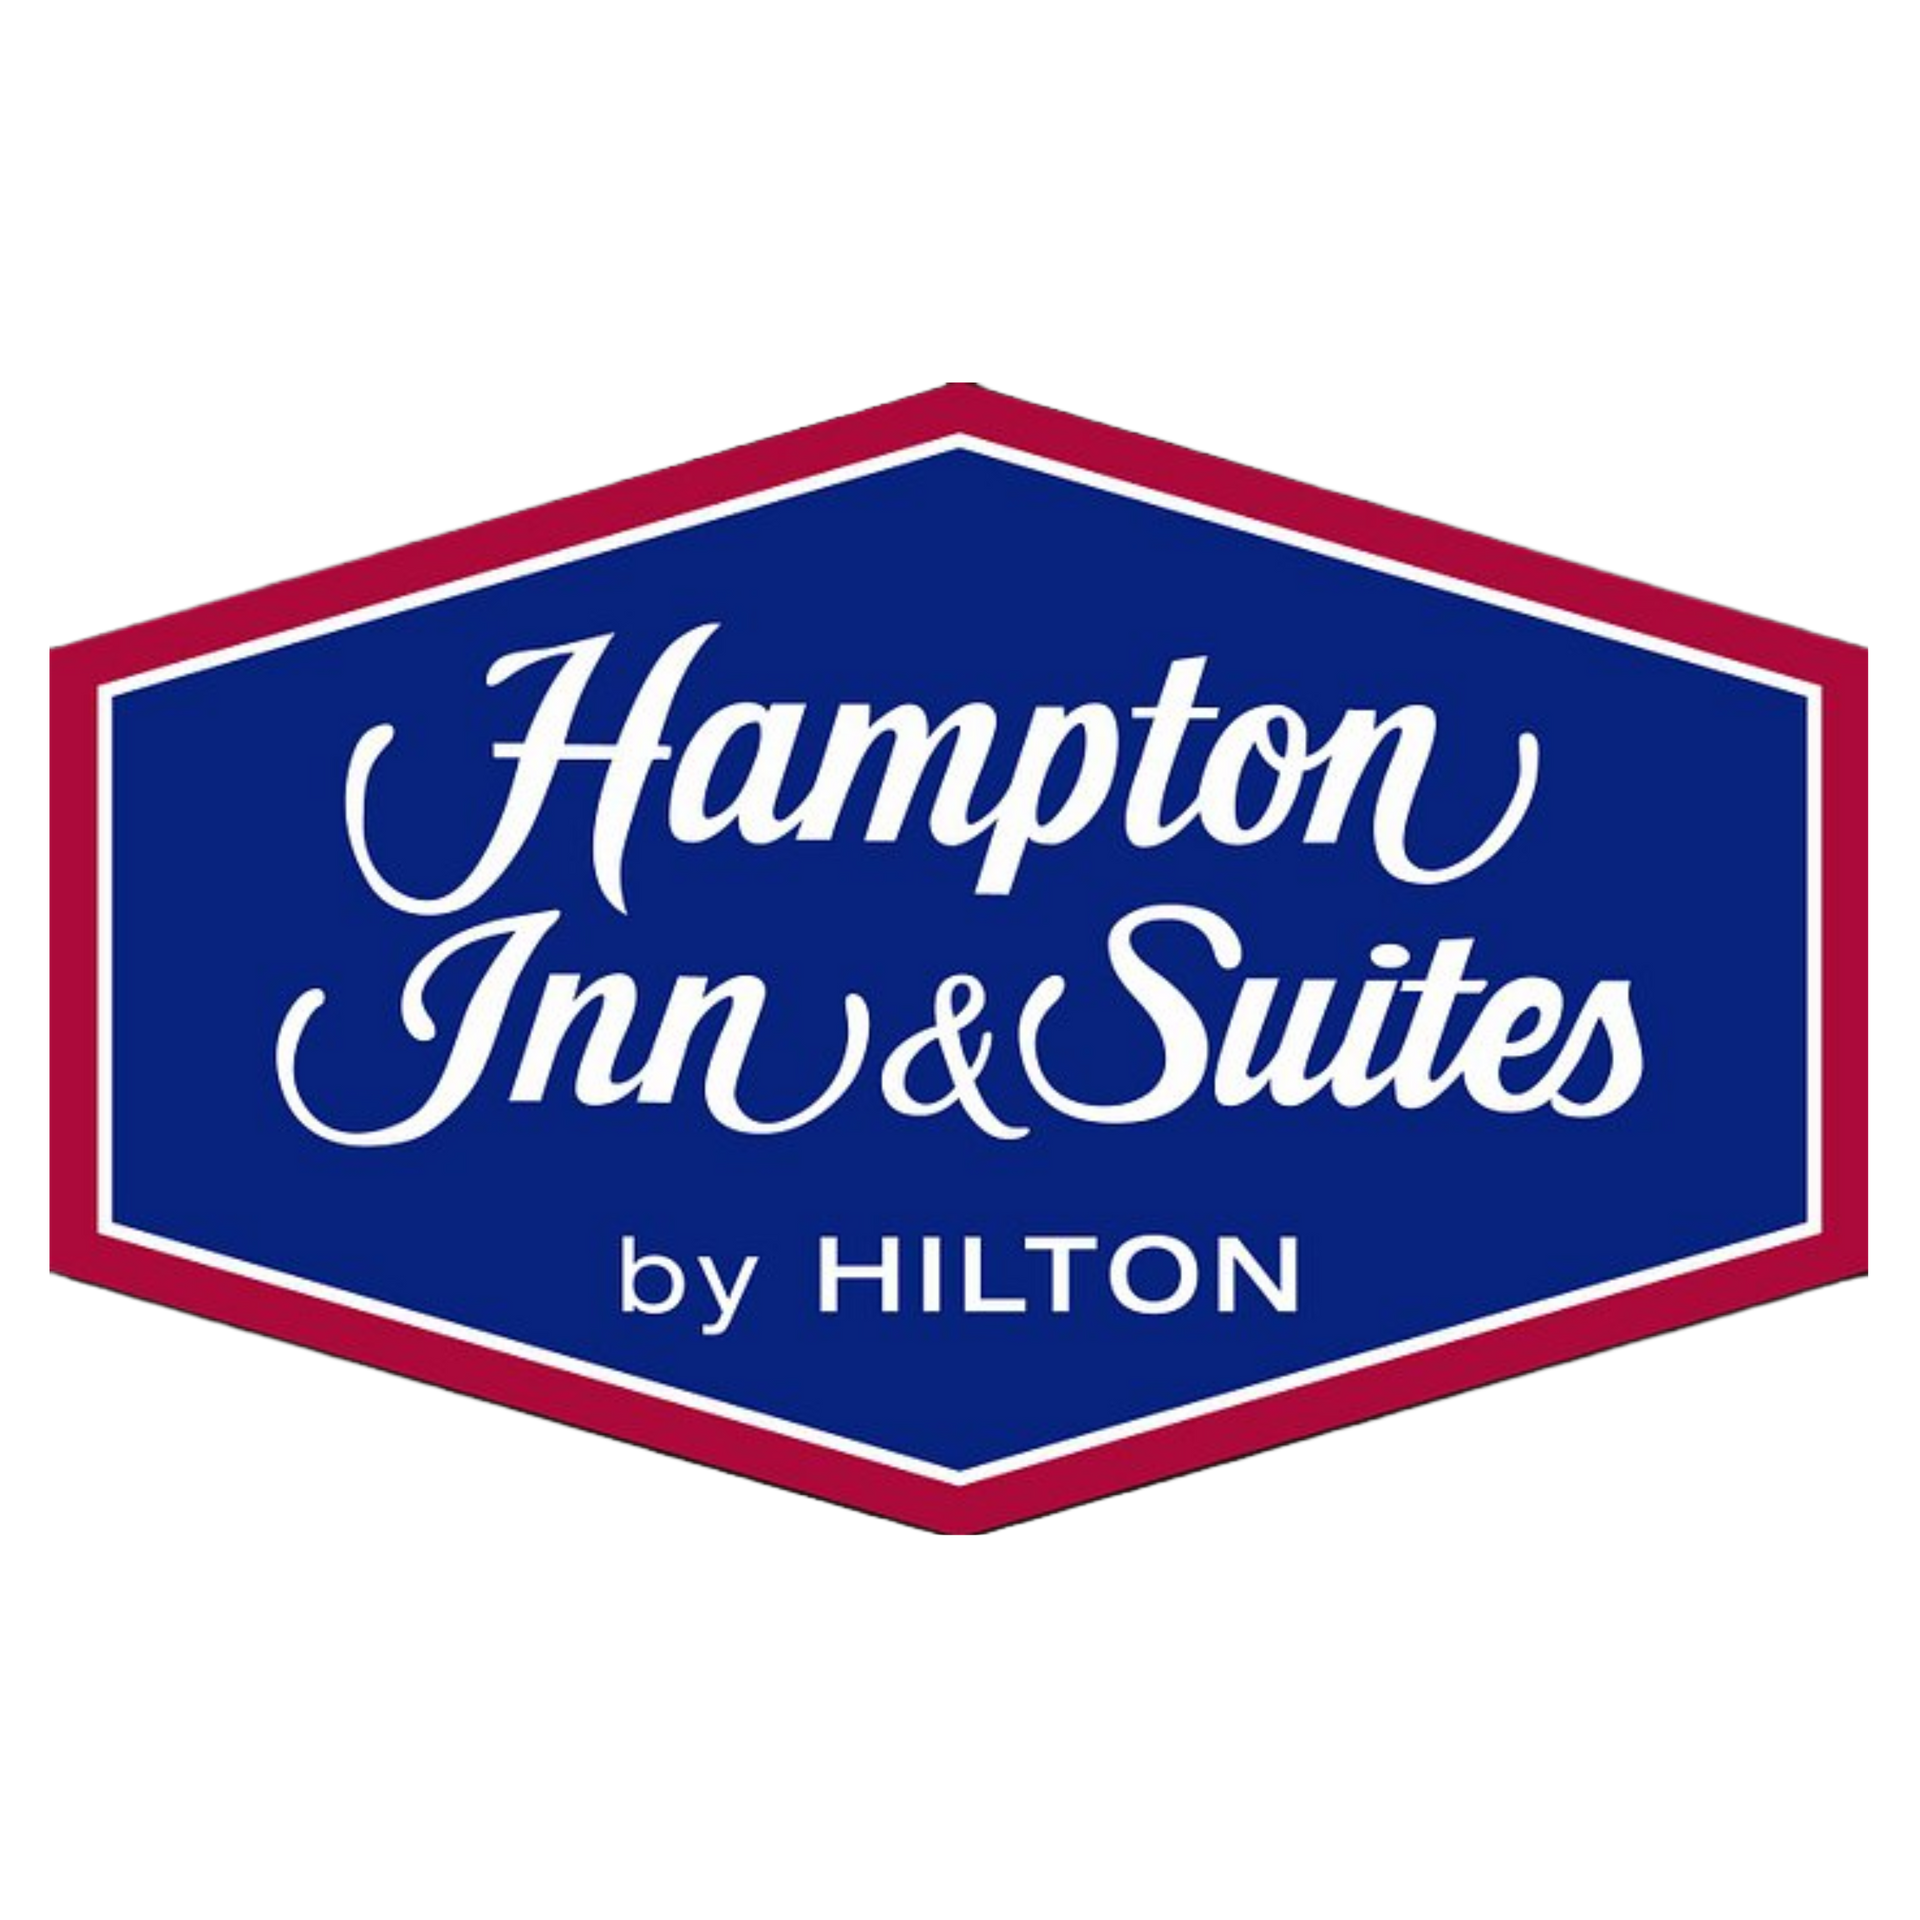 the logo for hampton inn and suites by hilton is blue and red .